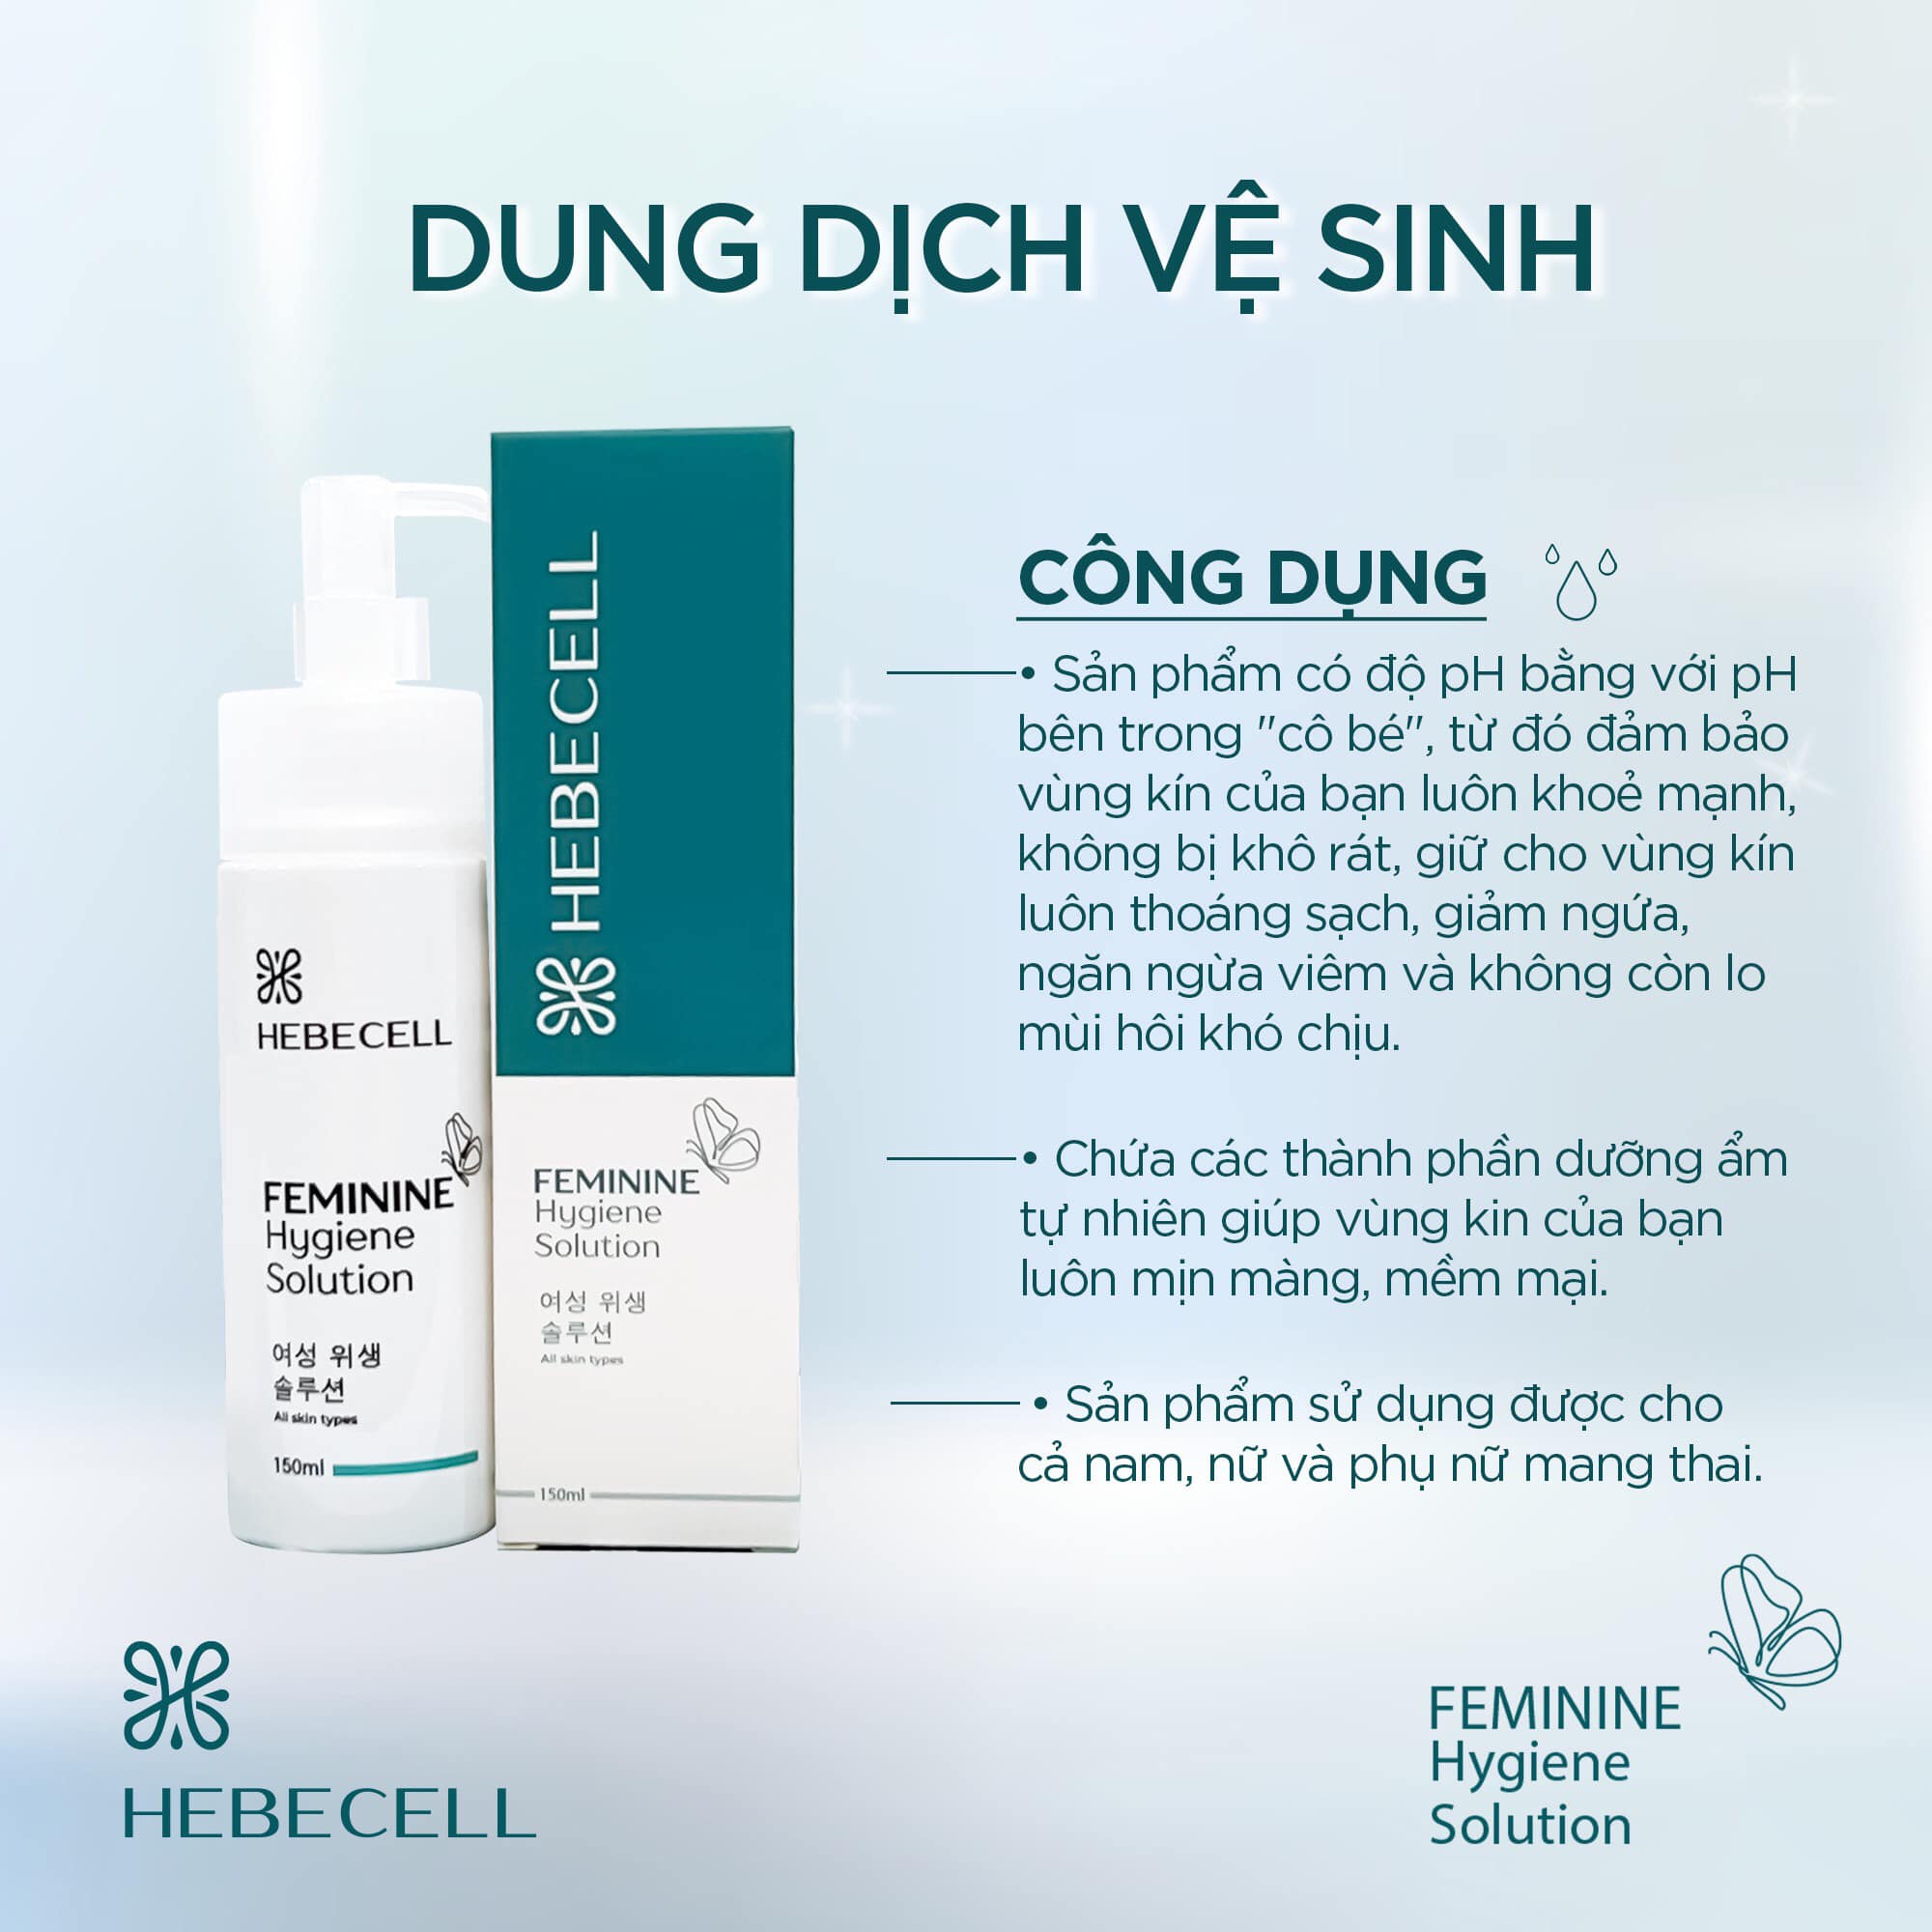 Dung dịch vệ sinh Hebecell